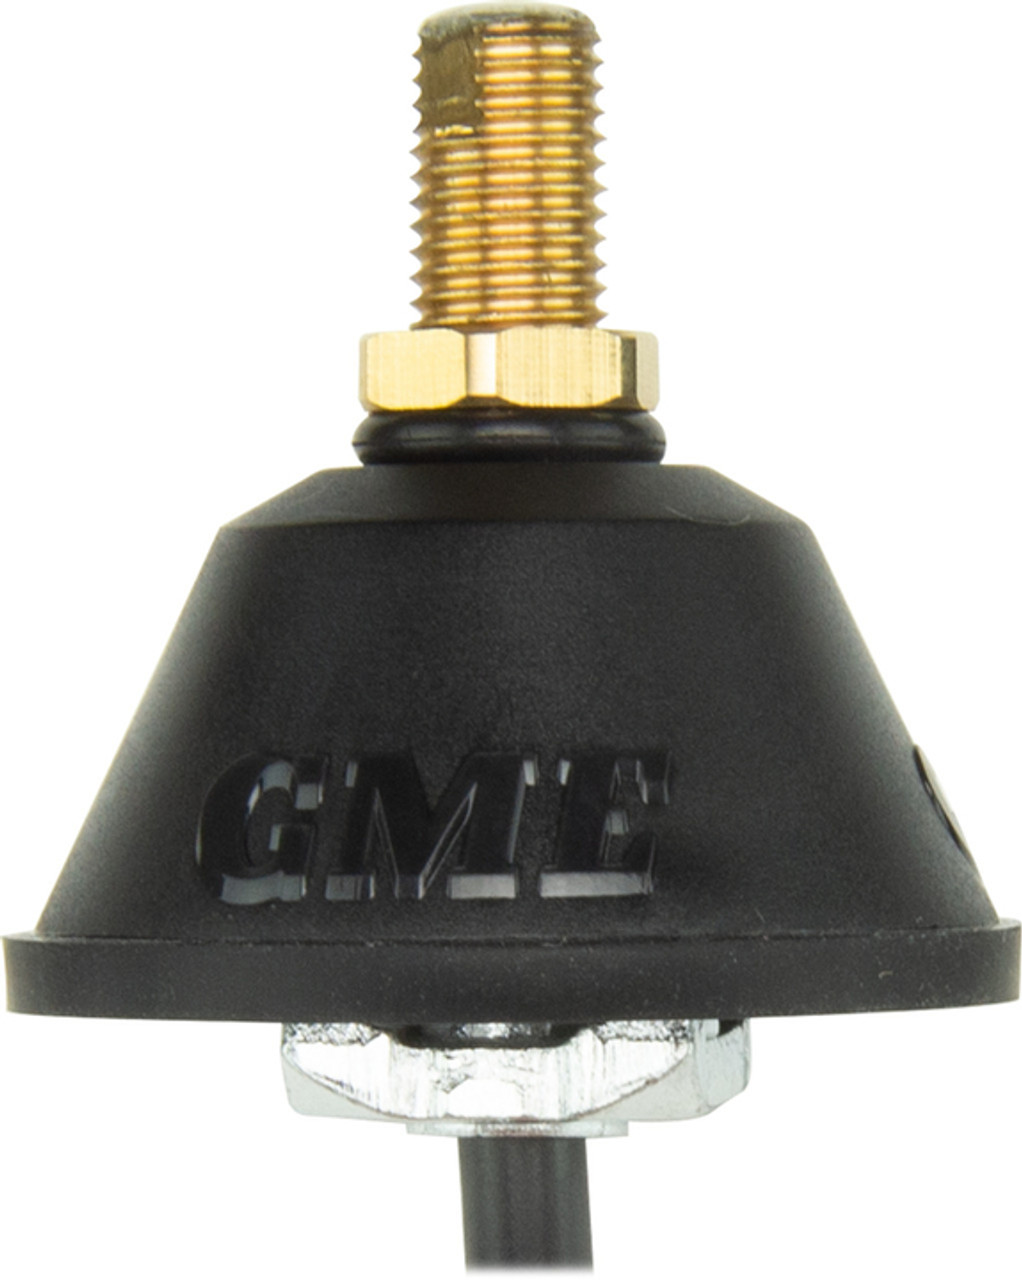 GME Universal Antenna Base with Low Loss Foam Coax & PL259